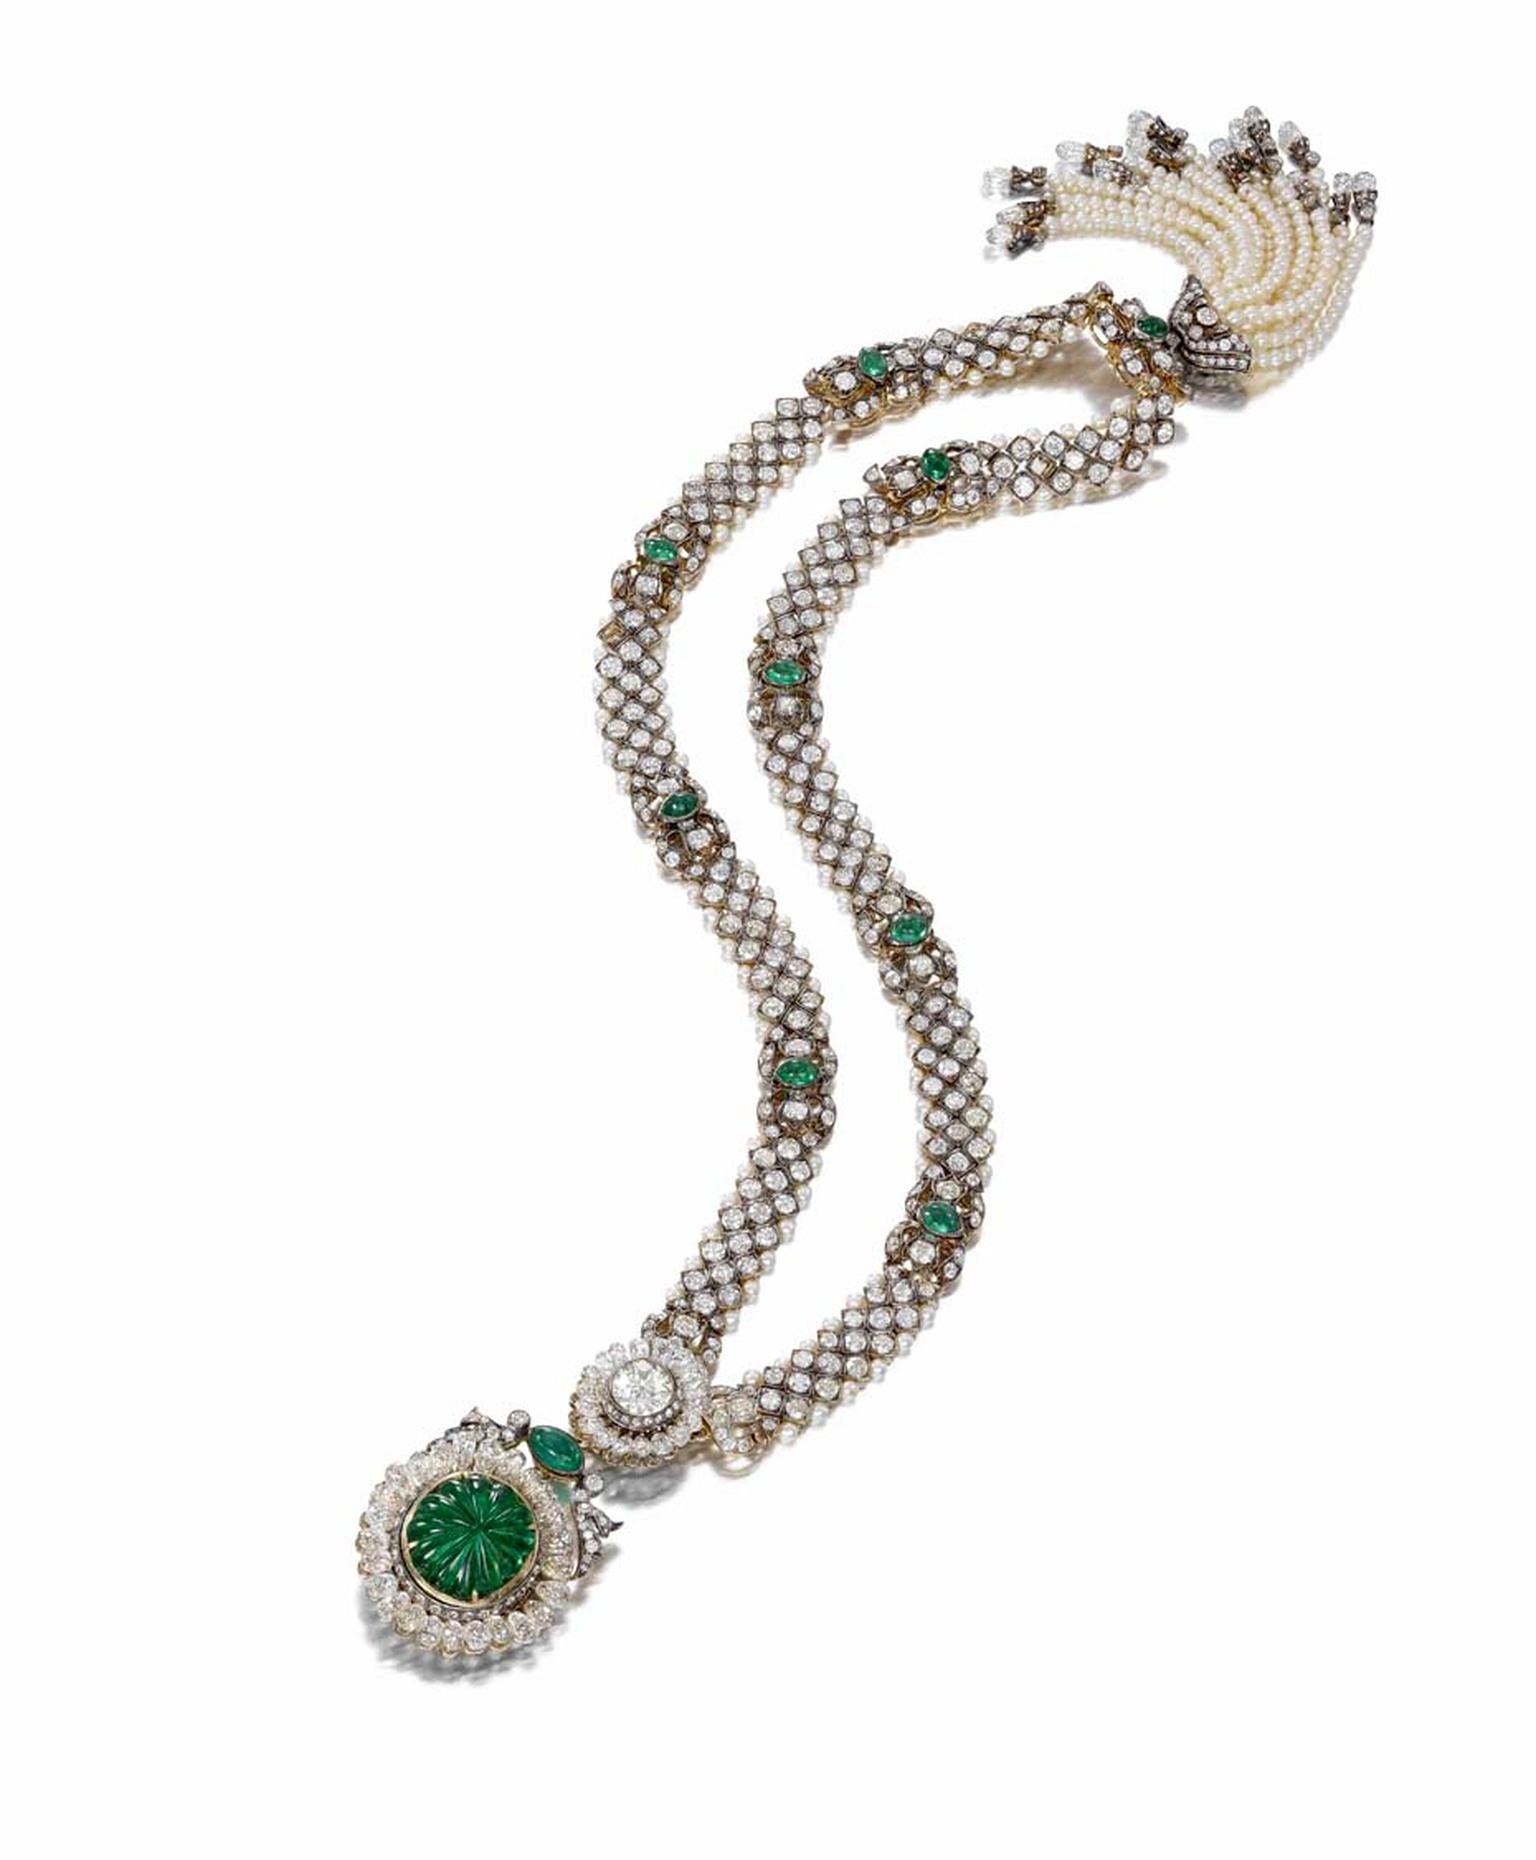 Jean Ghika, head of jewellery UK and Europe at Bonhams, says: “This necklace provides us with a unique insight into the levels of opulence and display at the 1911 Delhi Durbar and it is extremely rare to have such a magnificent jewel survive intact. The n